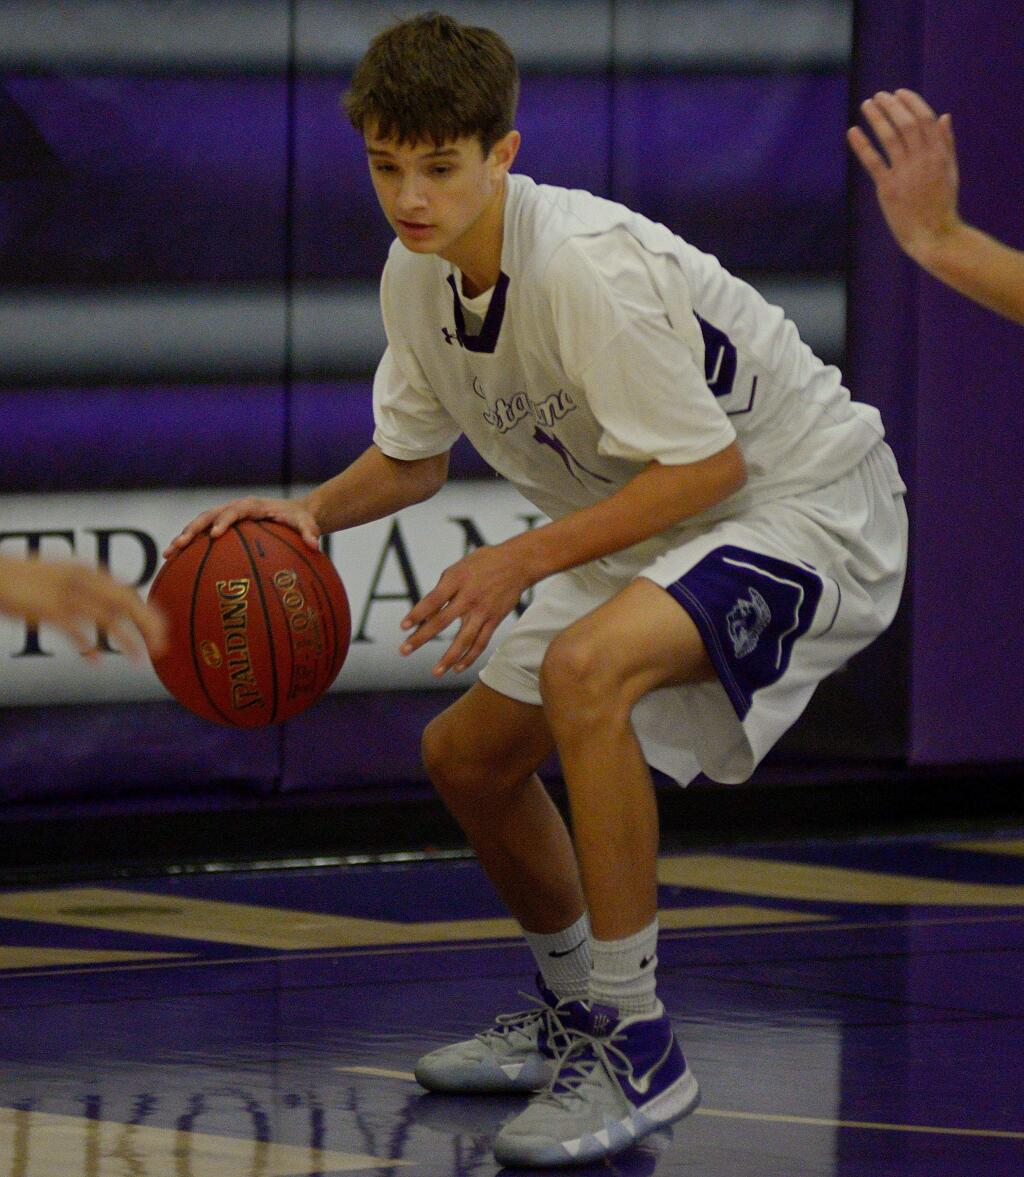 SUMNER FOWLER/FOR THE ARGUS-COURIERPetaluma's Ryan Giacomini made a miracle 4-point play to send the game into overtime and then hit another 3-point shot to lead the Trojan JVs to a 66-62 win over Casa Grande in the Wayne Douglas Junior Varsity Tournament.